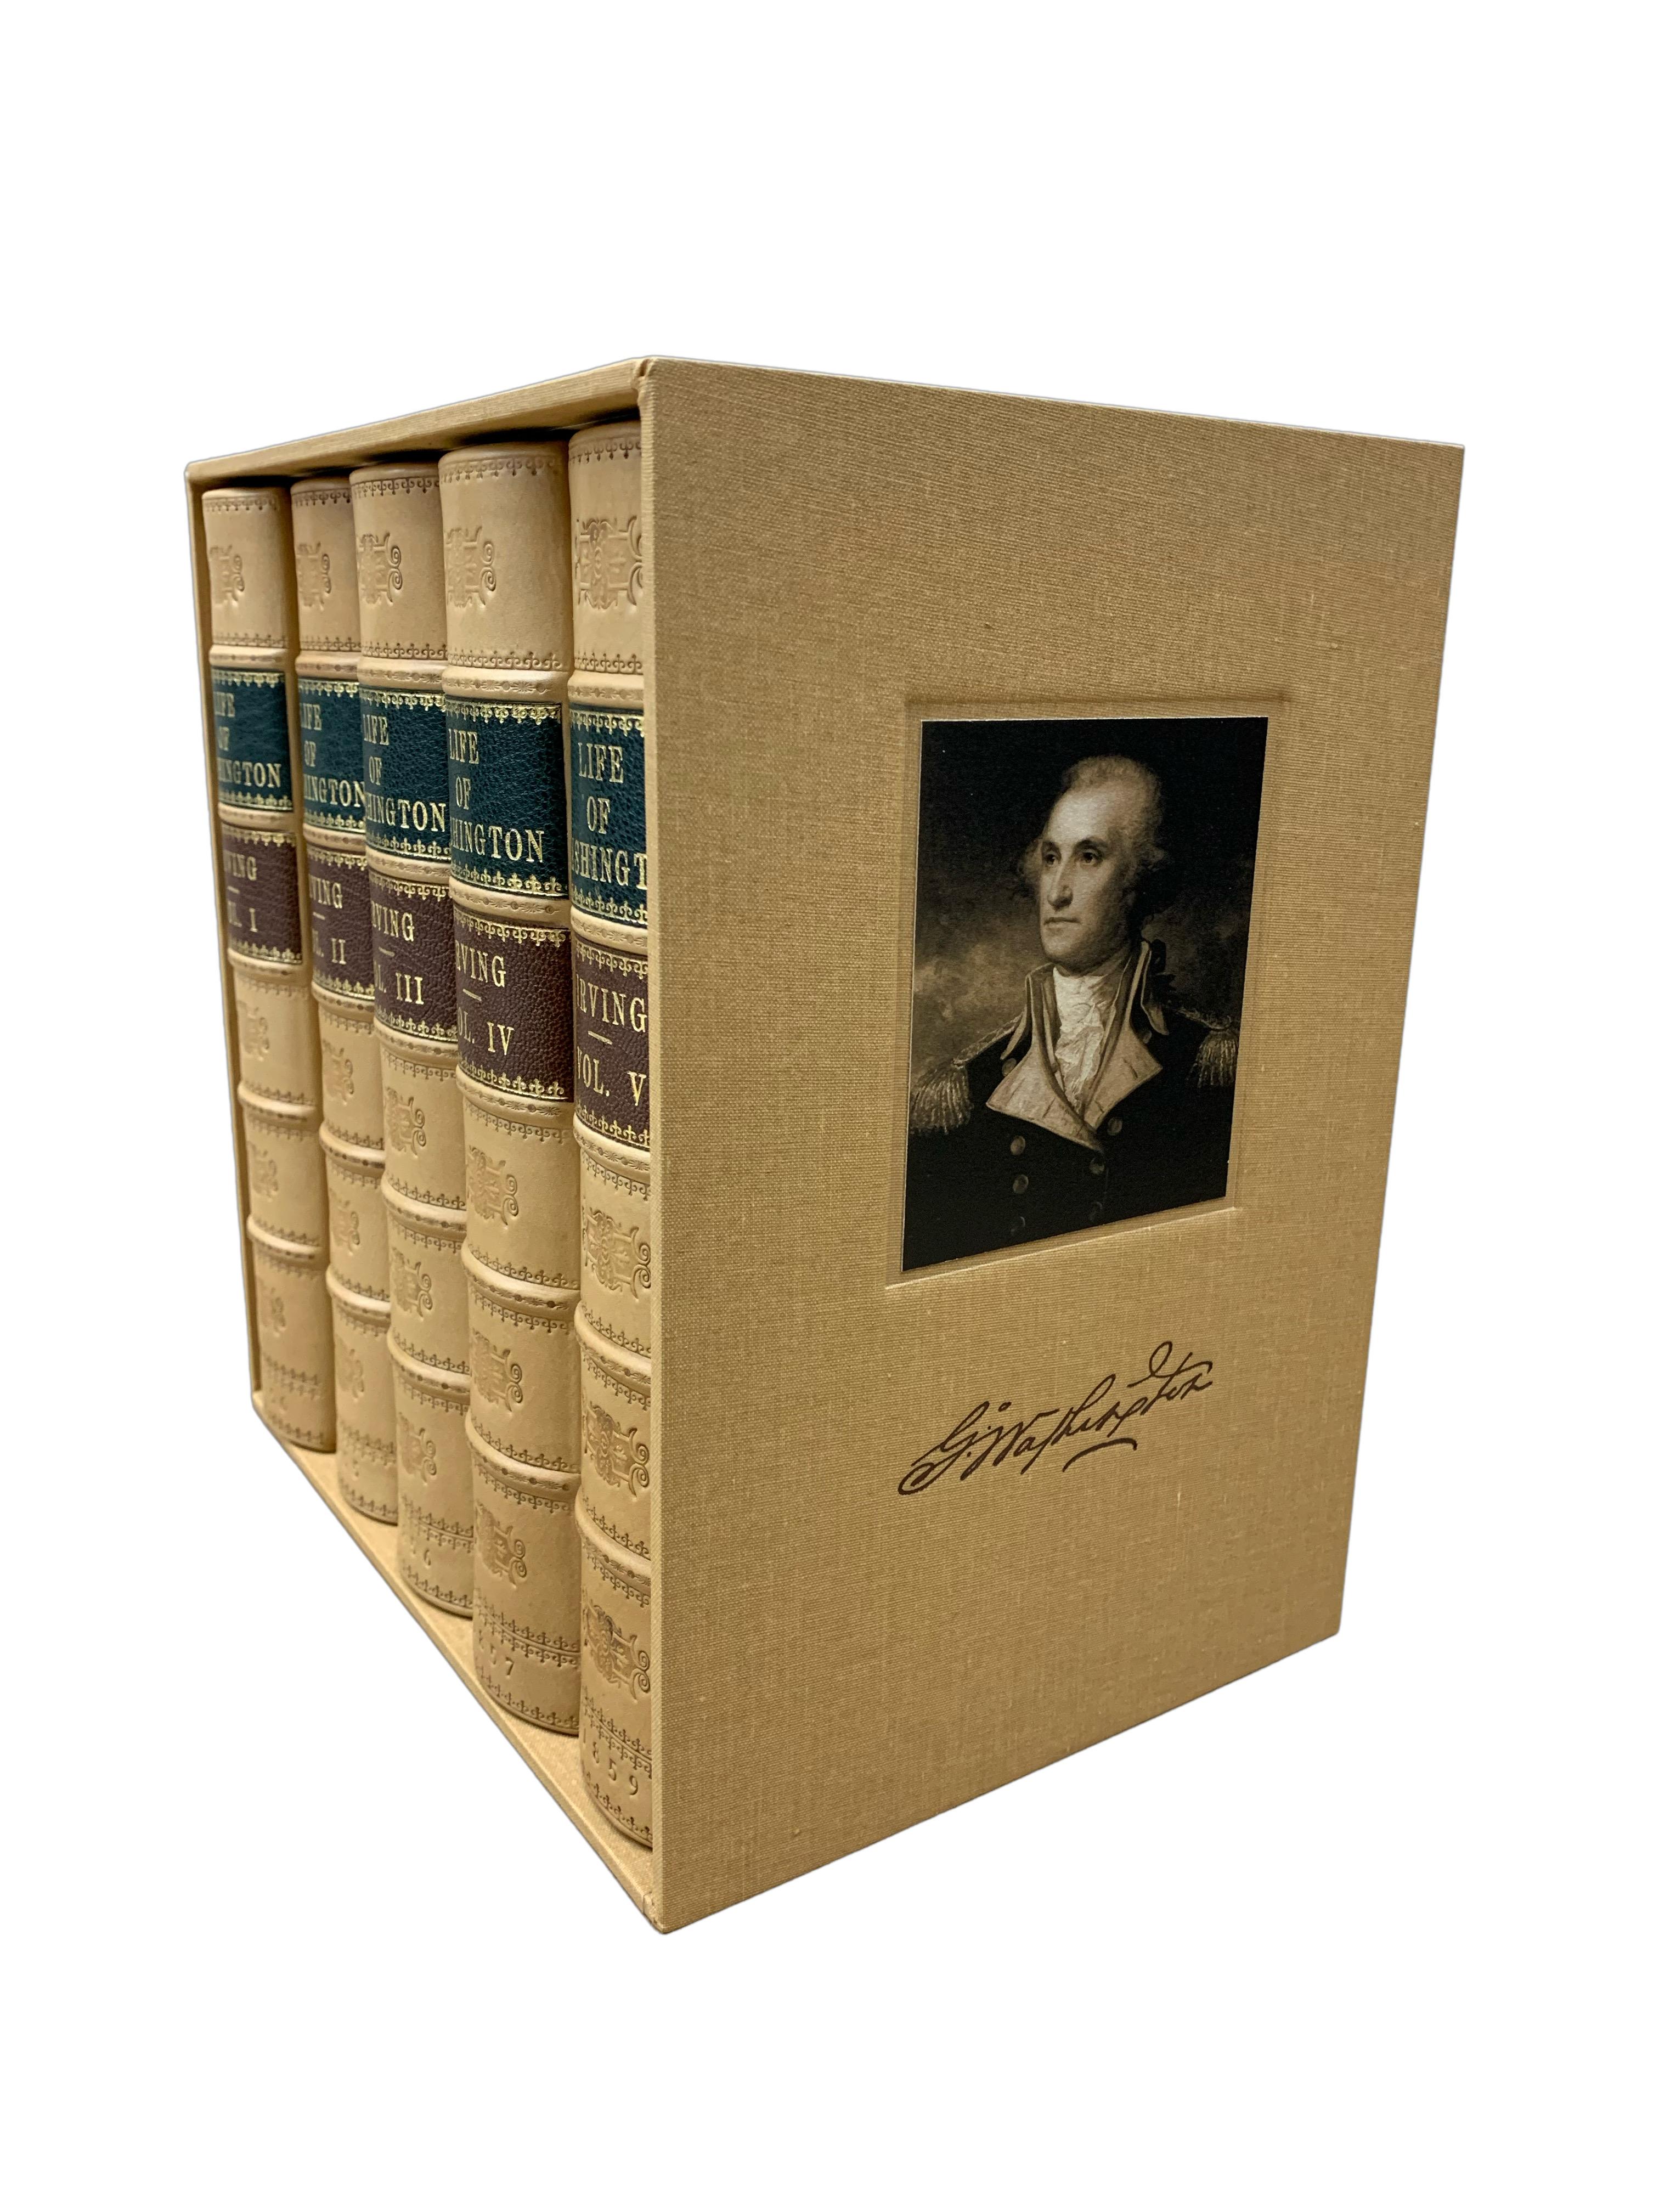 American The Life of George Washington by Washington Irving, Five Volumes, 1856-1859